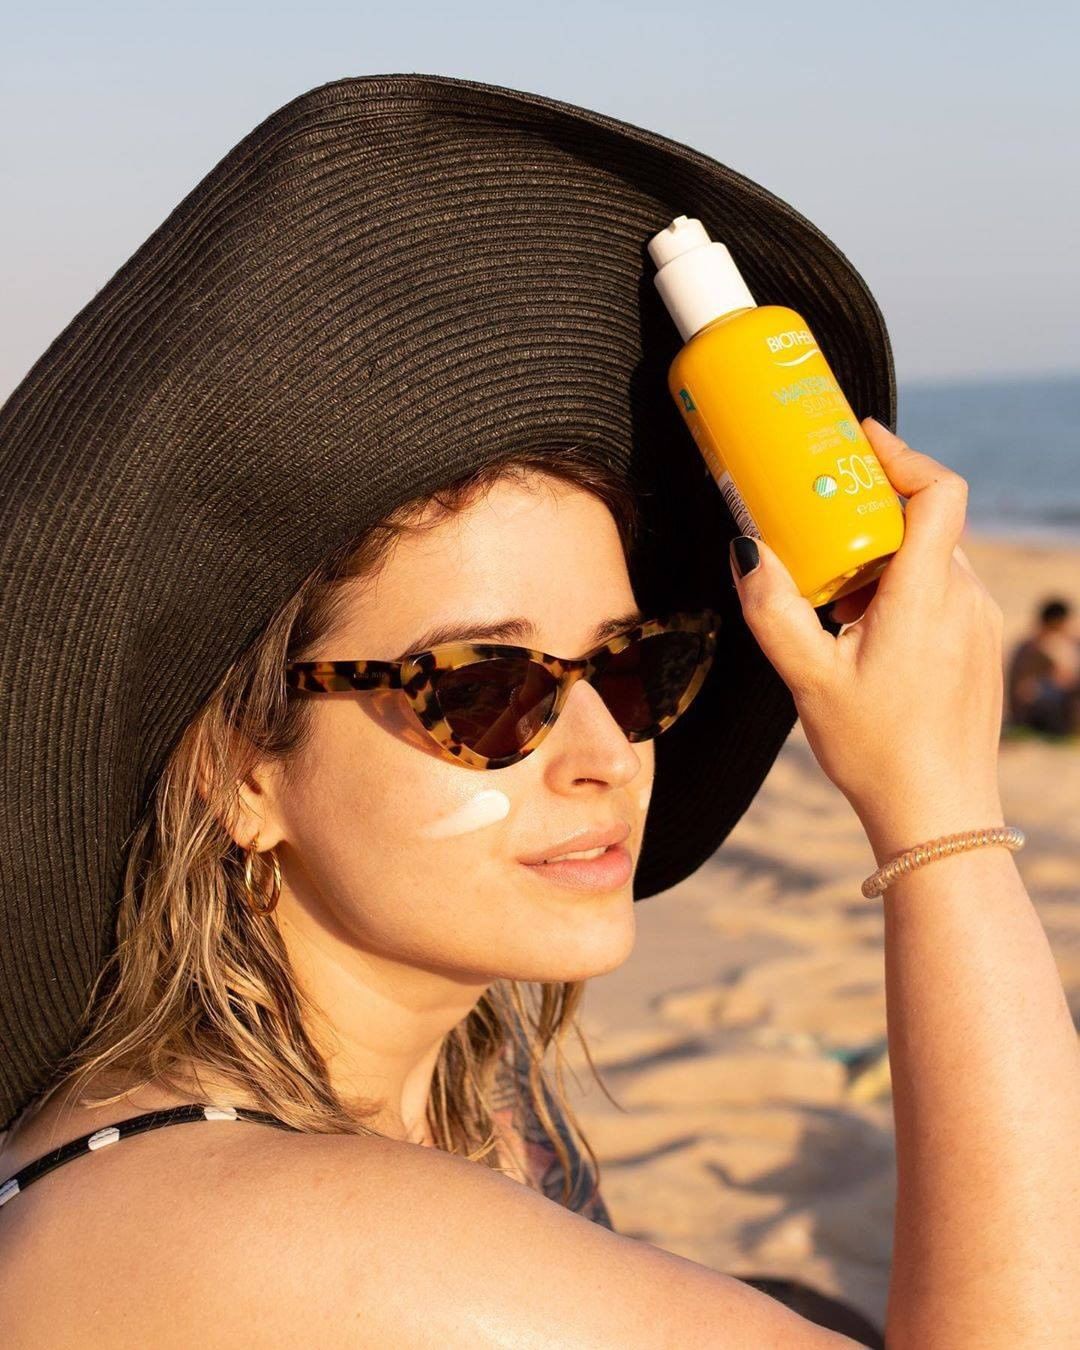 BIOTHERM - Beach side with our beach babe @jaelcorreia and her Waterlover Sun Milk. 

This year, with the Nordic Swan Eco-Label, our Waterlover Sun Milk has joined the esteemed group of products that...